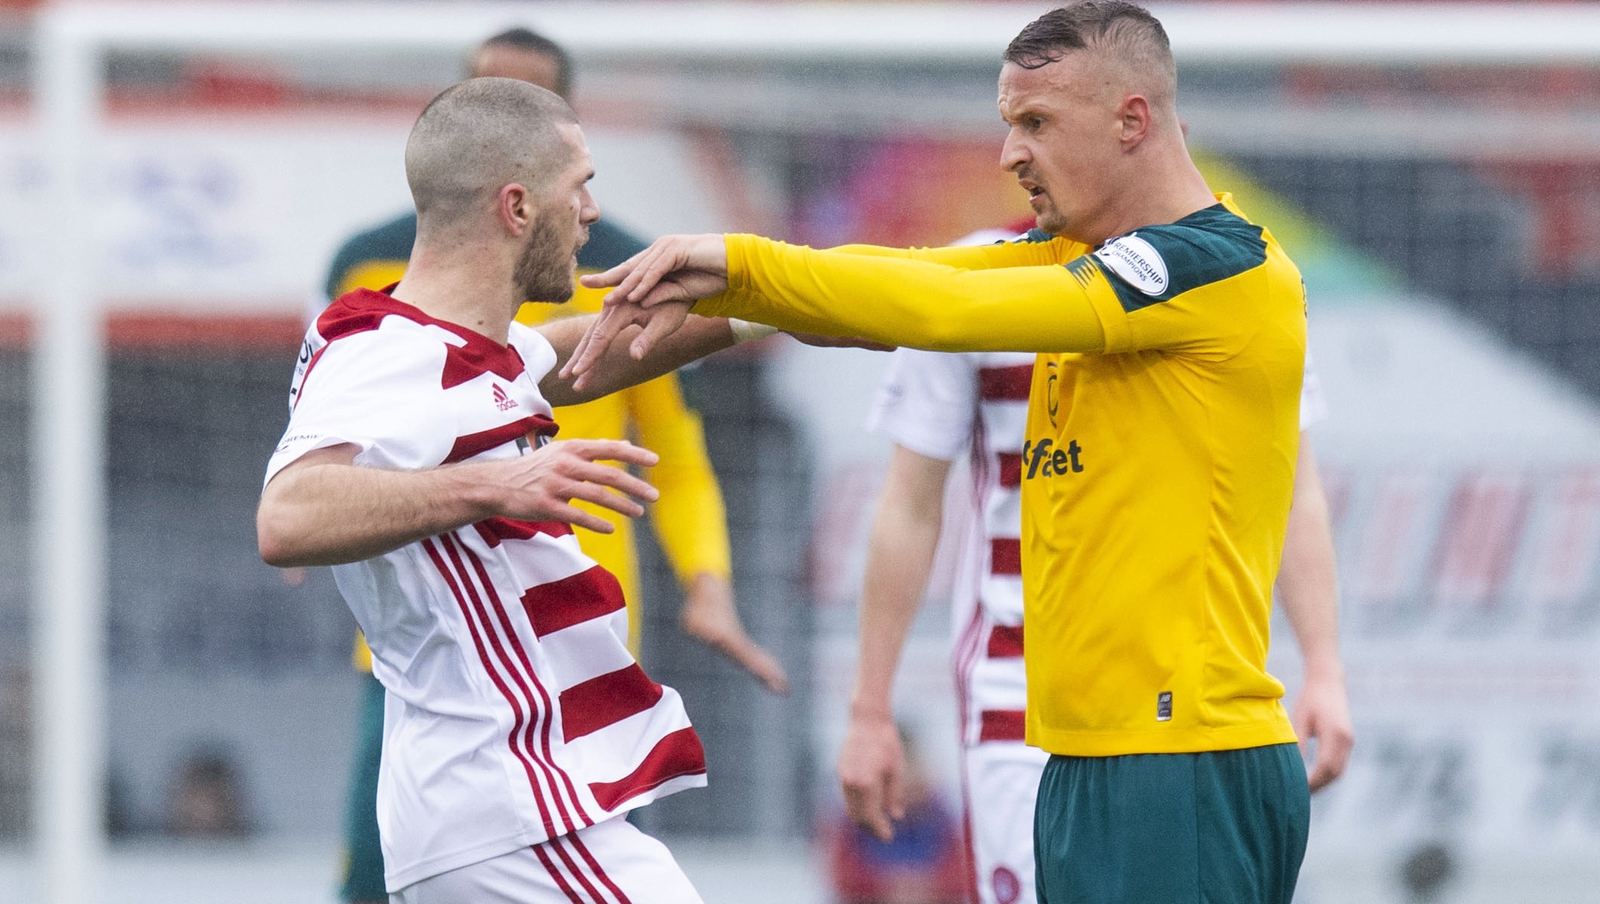 Celtic hit with charges over conduct by SFA